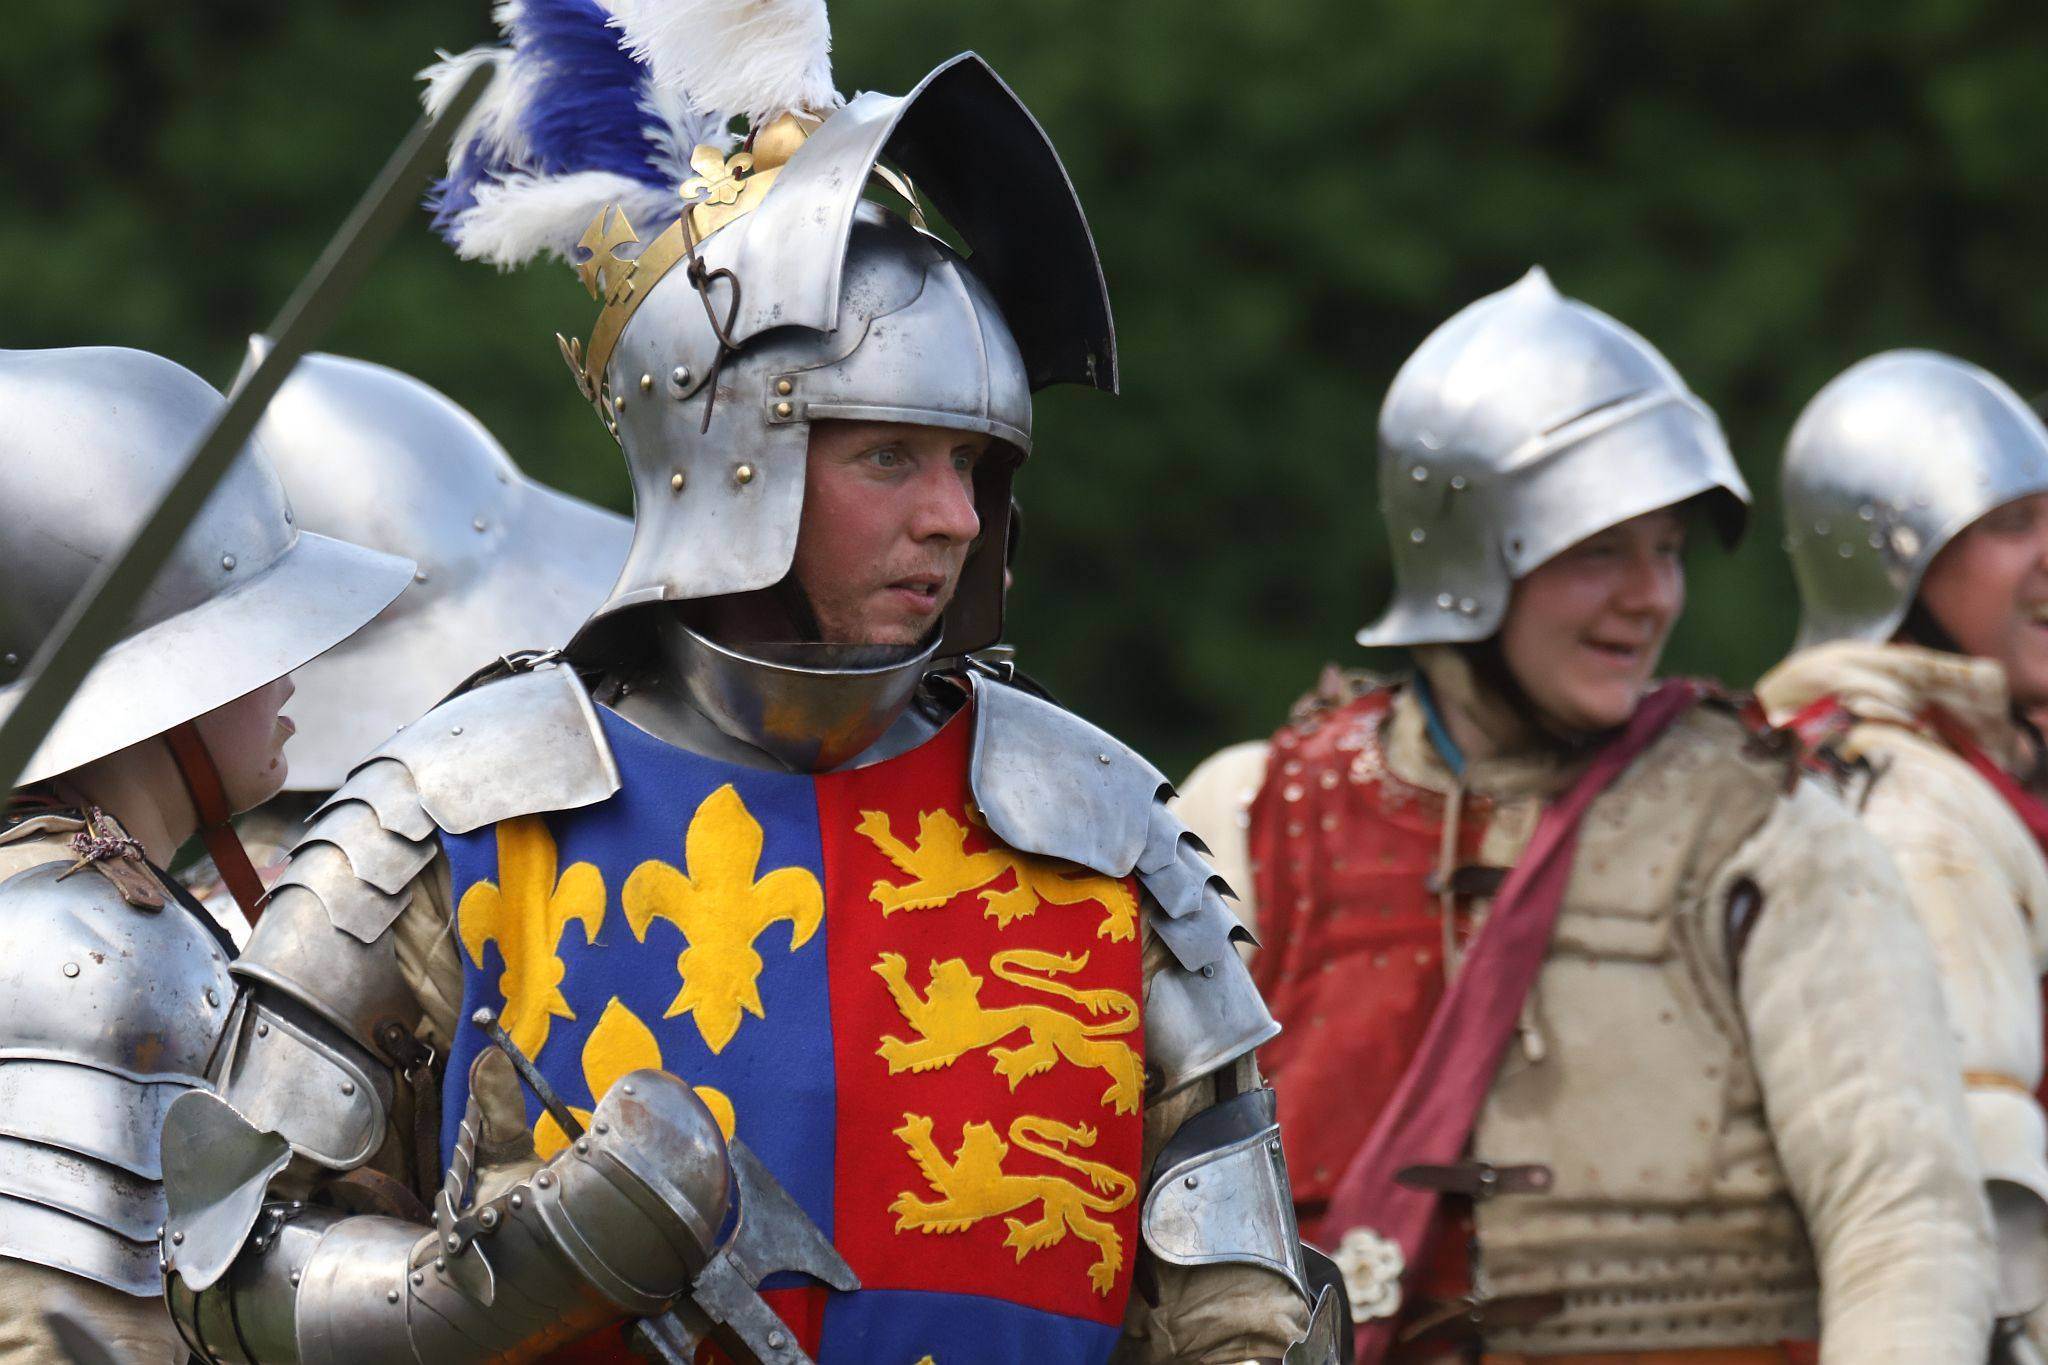 2023 Battle of Barnet Re-enactment, Wars of the Roses. Medieval re-enactors. Swords, armour, knights. King. Royal.